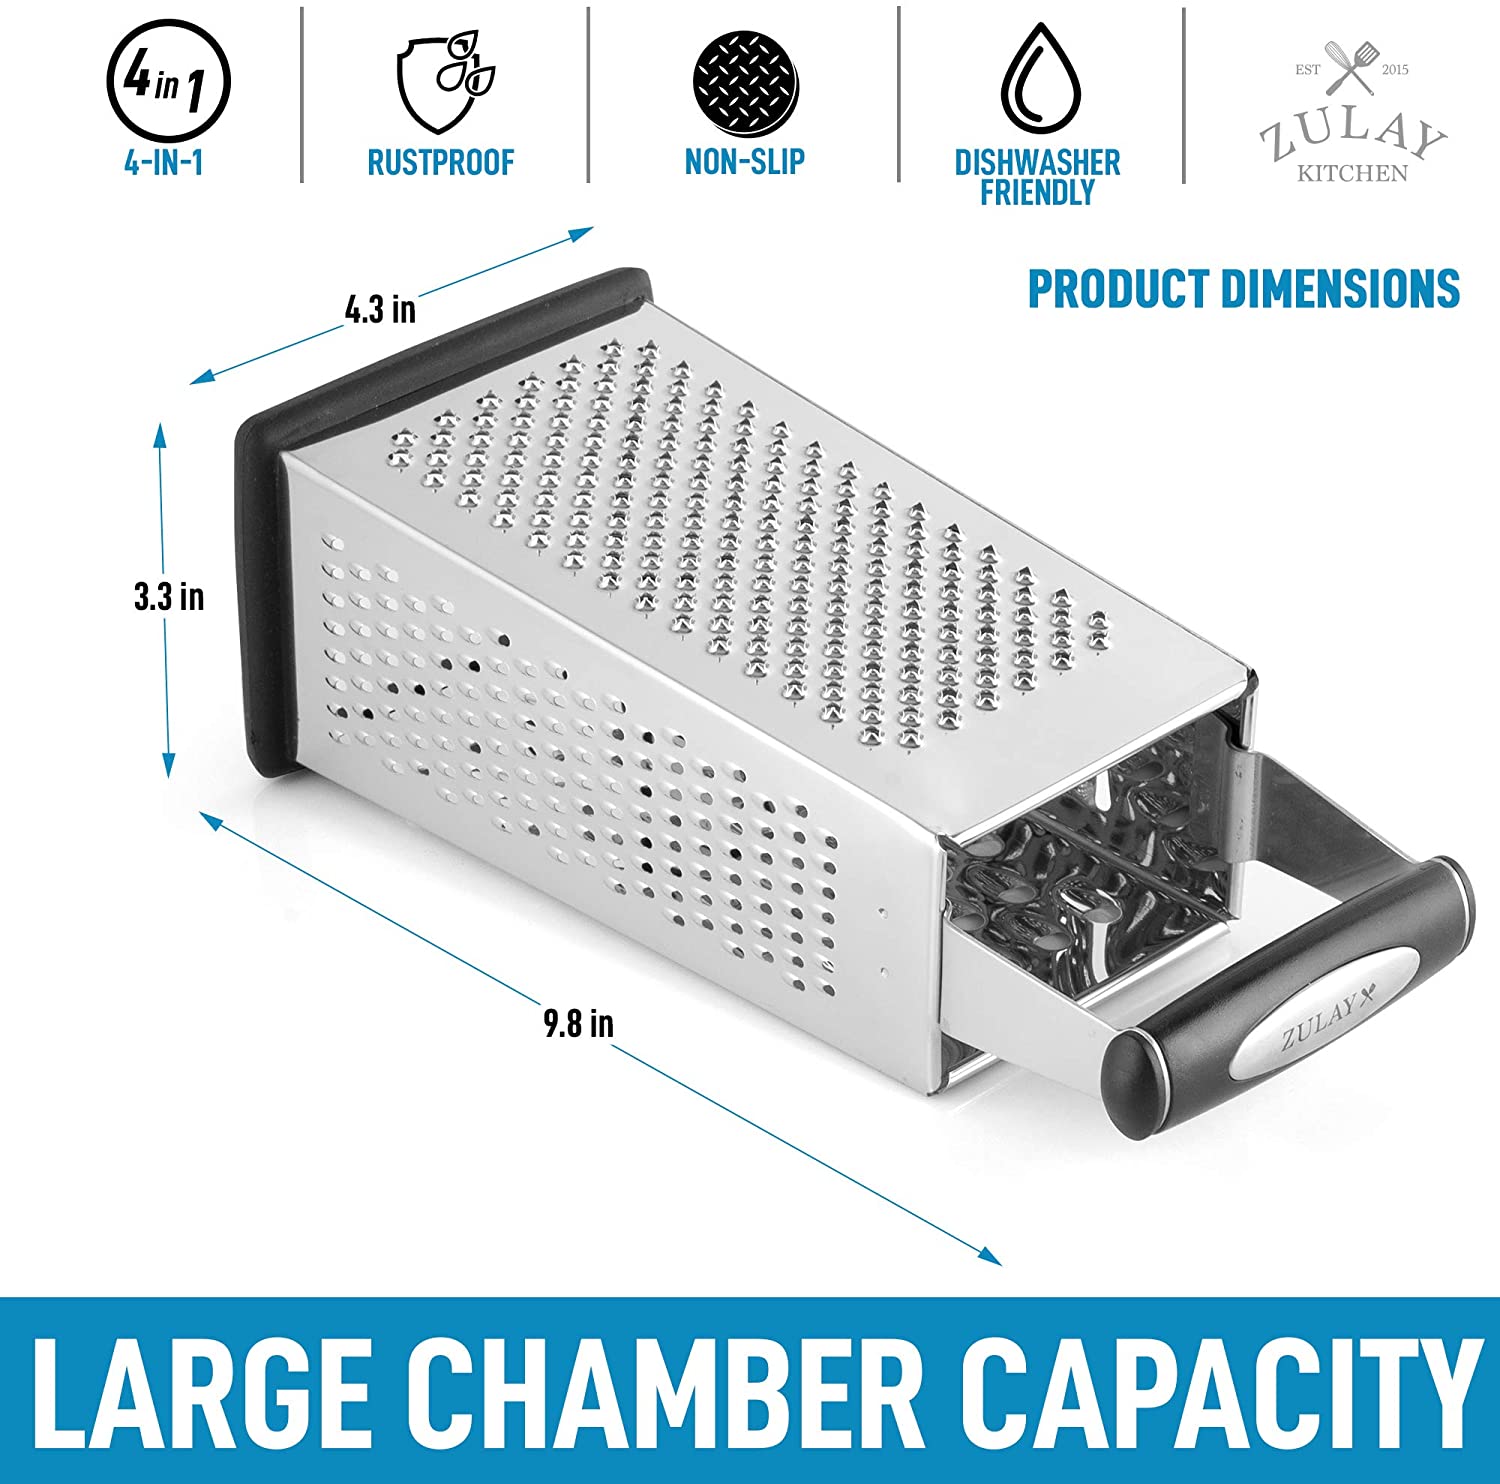 Get-A-Grip® 10 Manual Cheese Grater (GRP-10CG)